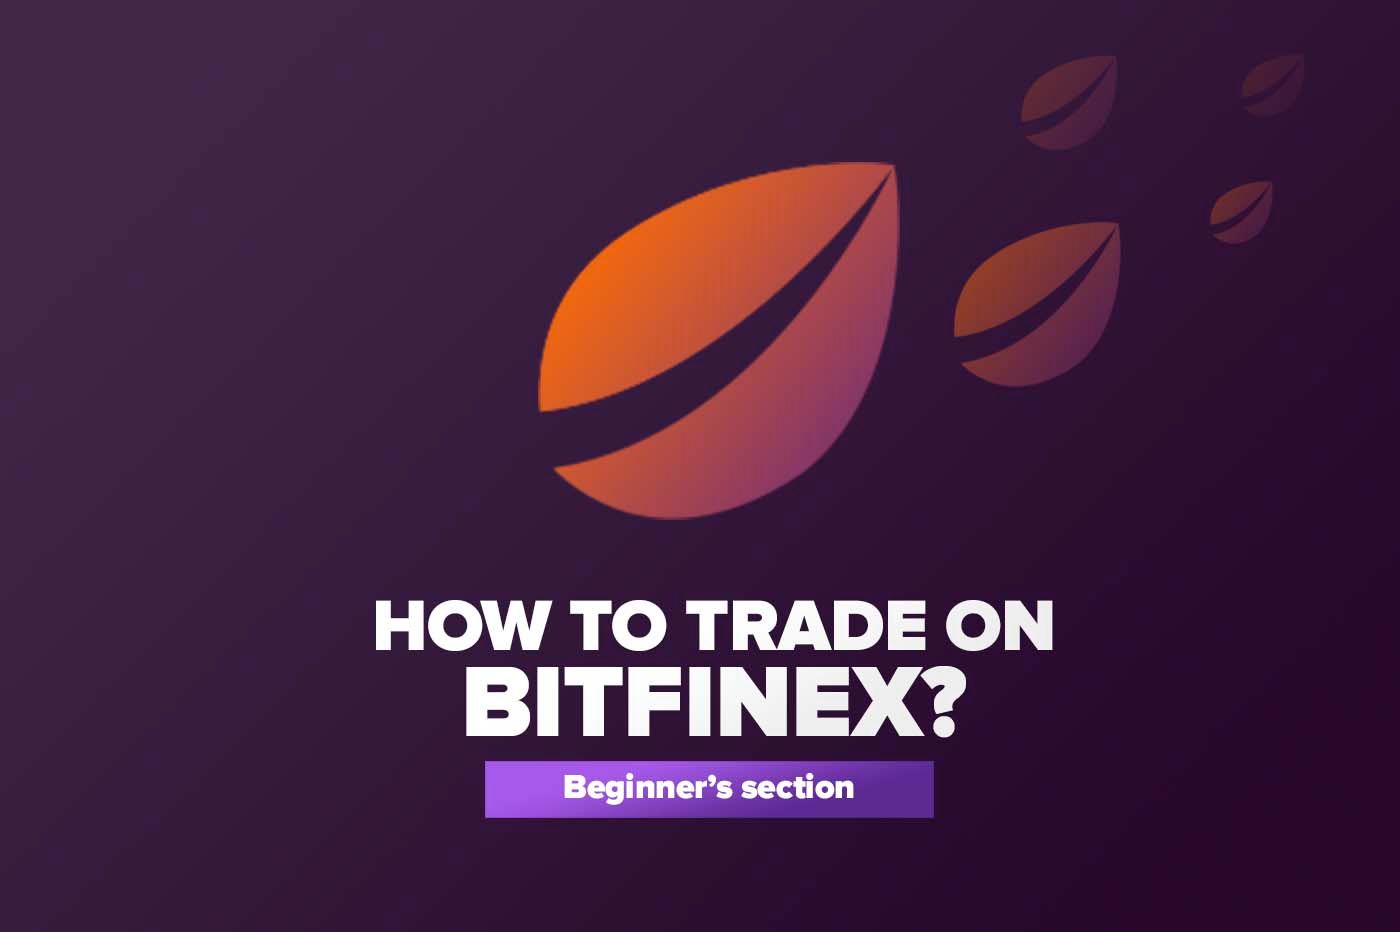 How to trade on Bitfinex